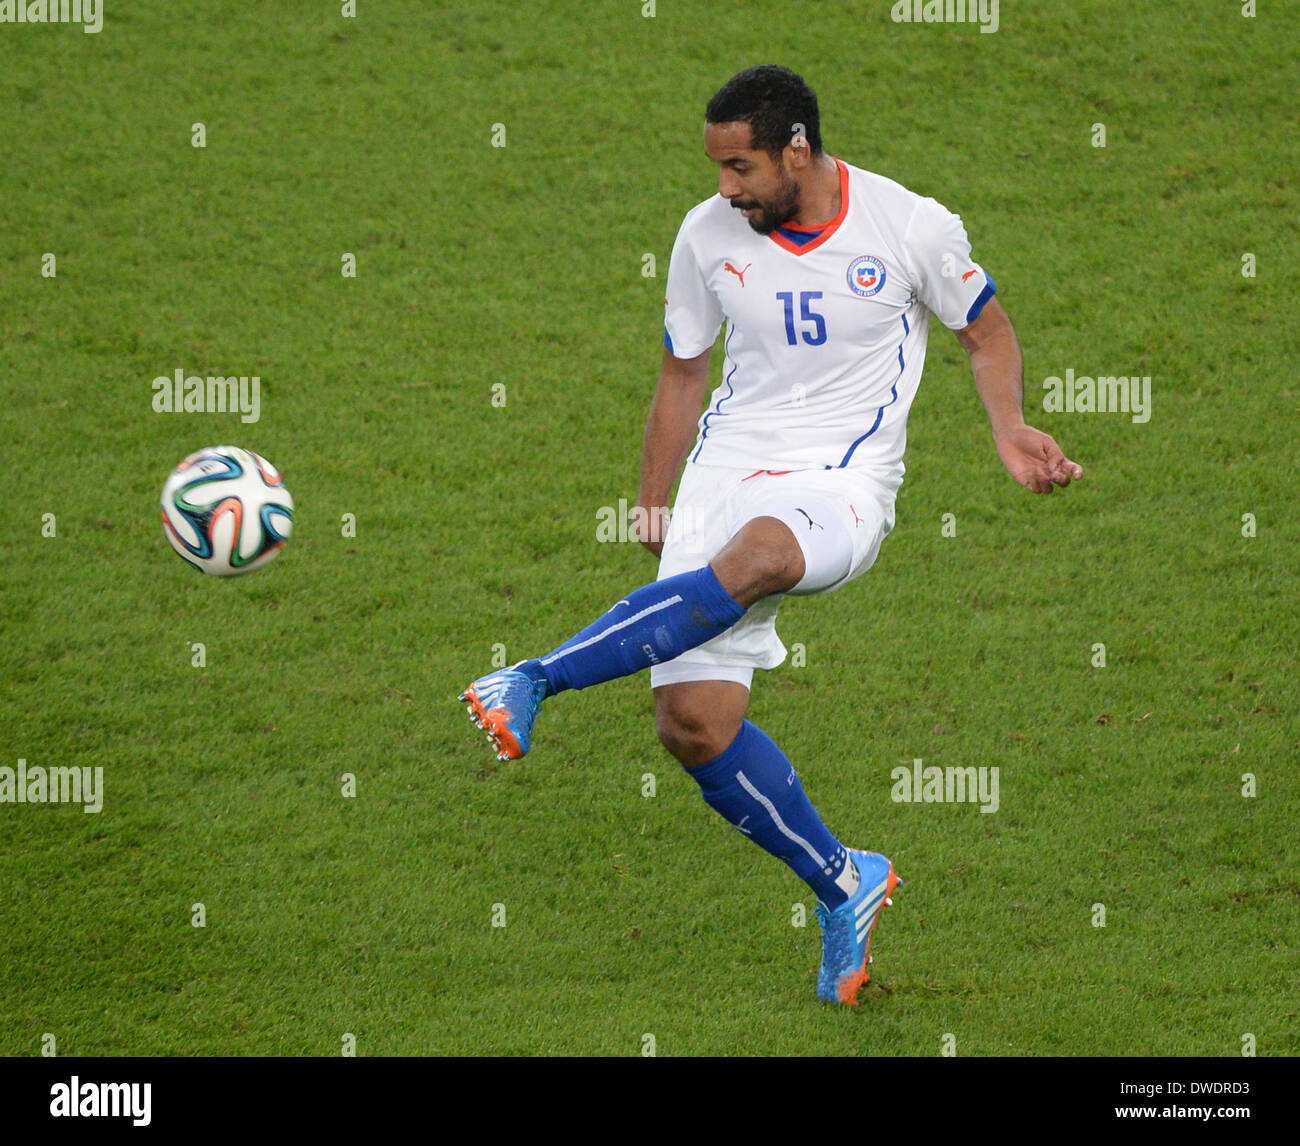 Stuttgart, Germany. 05th Mar, 2014. Chile's Jean Beausejour kicks the ball during the international friendly match between Germany and Chile at Mercedes-Benz-Arena in Stuttgart, Germany, 05 March 2014. Photo: Patrick Seeger/dpa/Alamy Live News Stock Photo